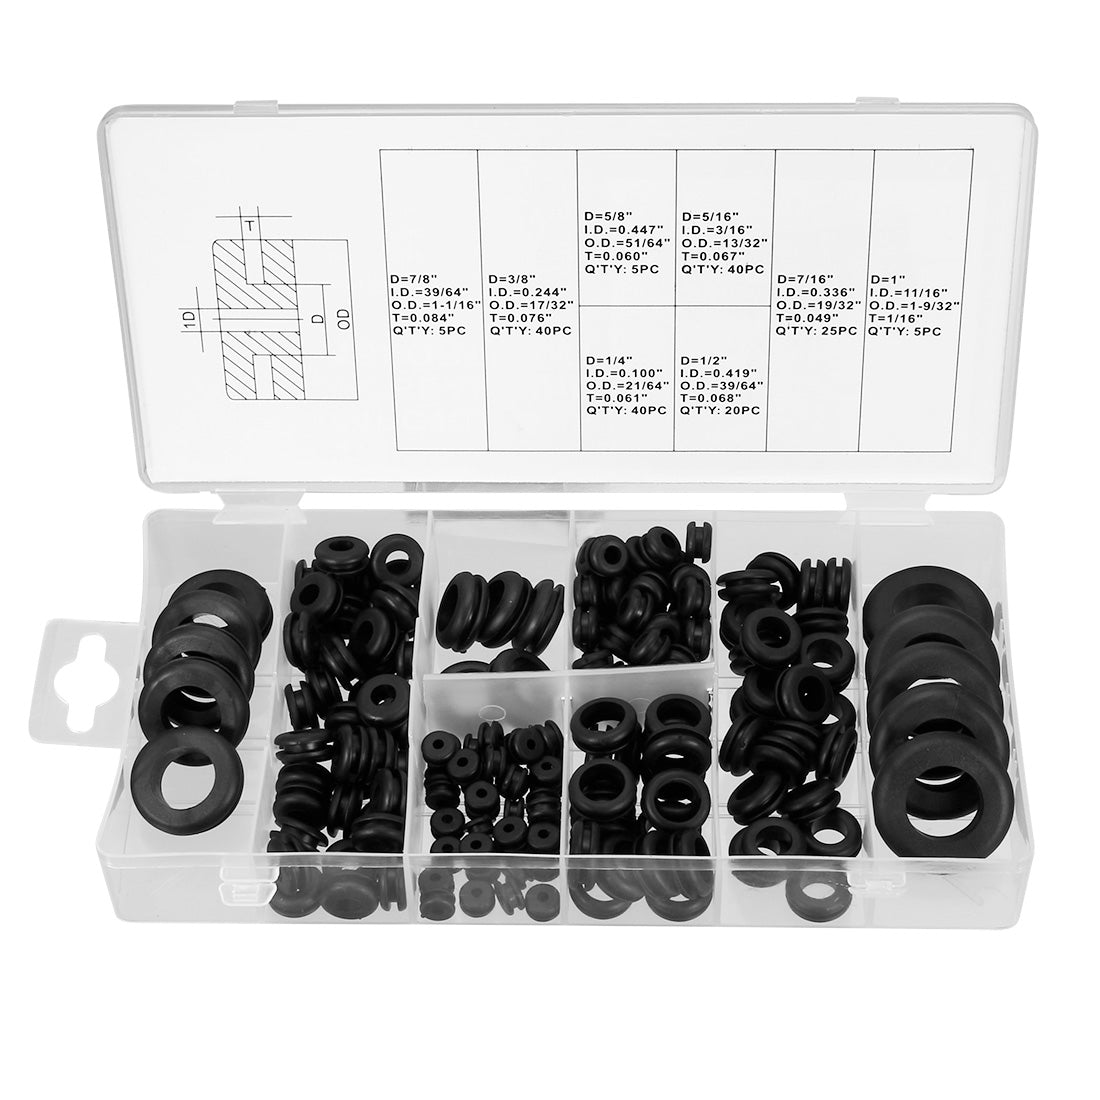 uxcell Uxcell 180 Pcs Rubber Grommet Assortment Fire Wall Firewall Wiring Electrical Wire Gasket Kit